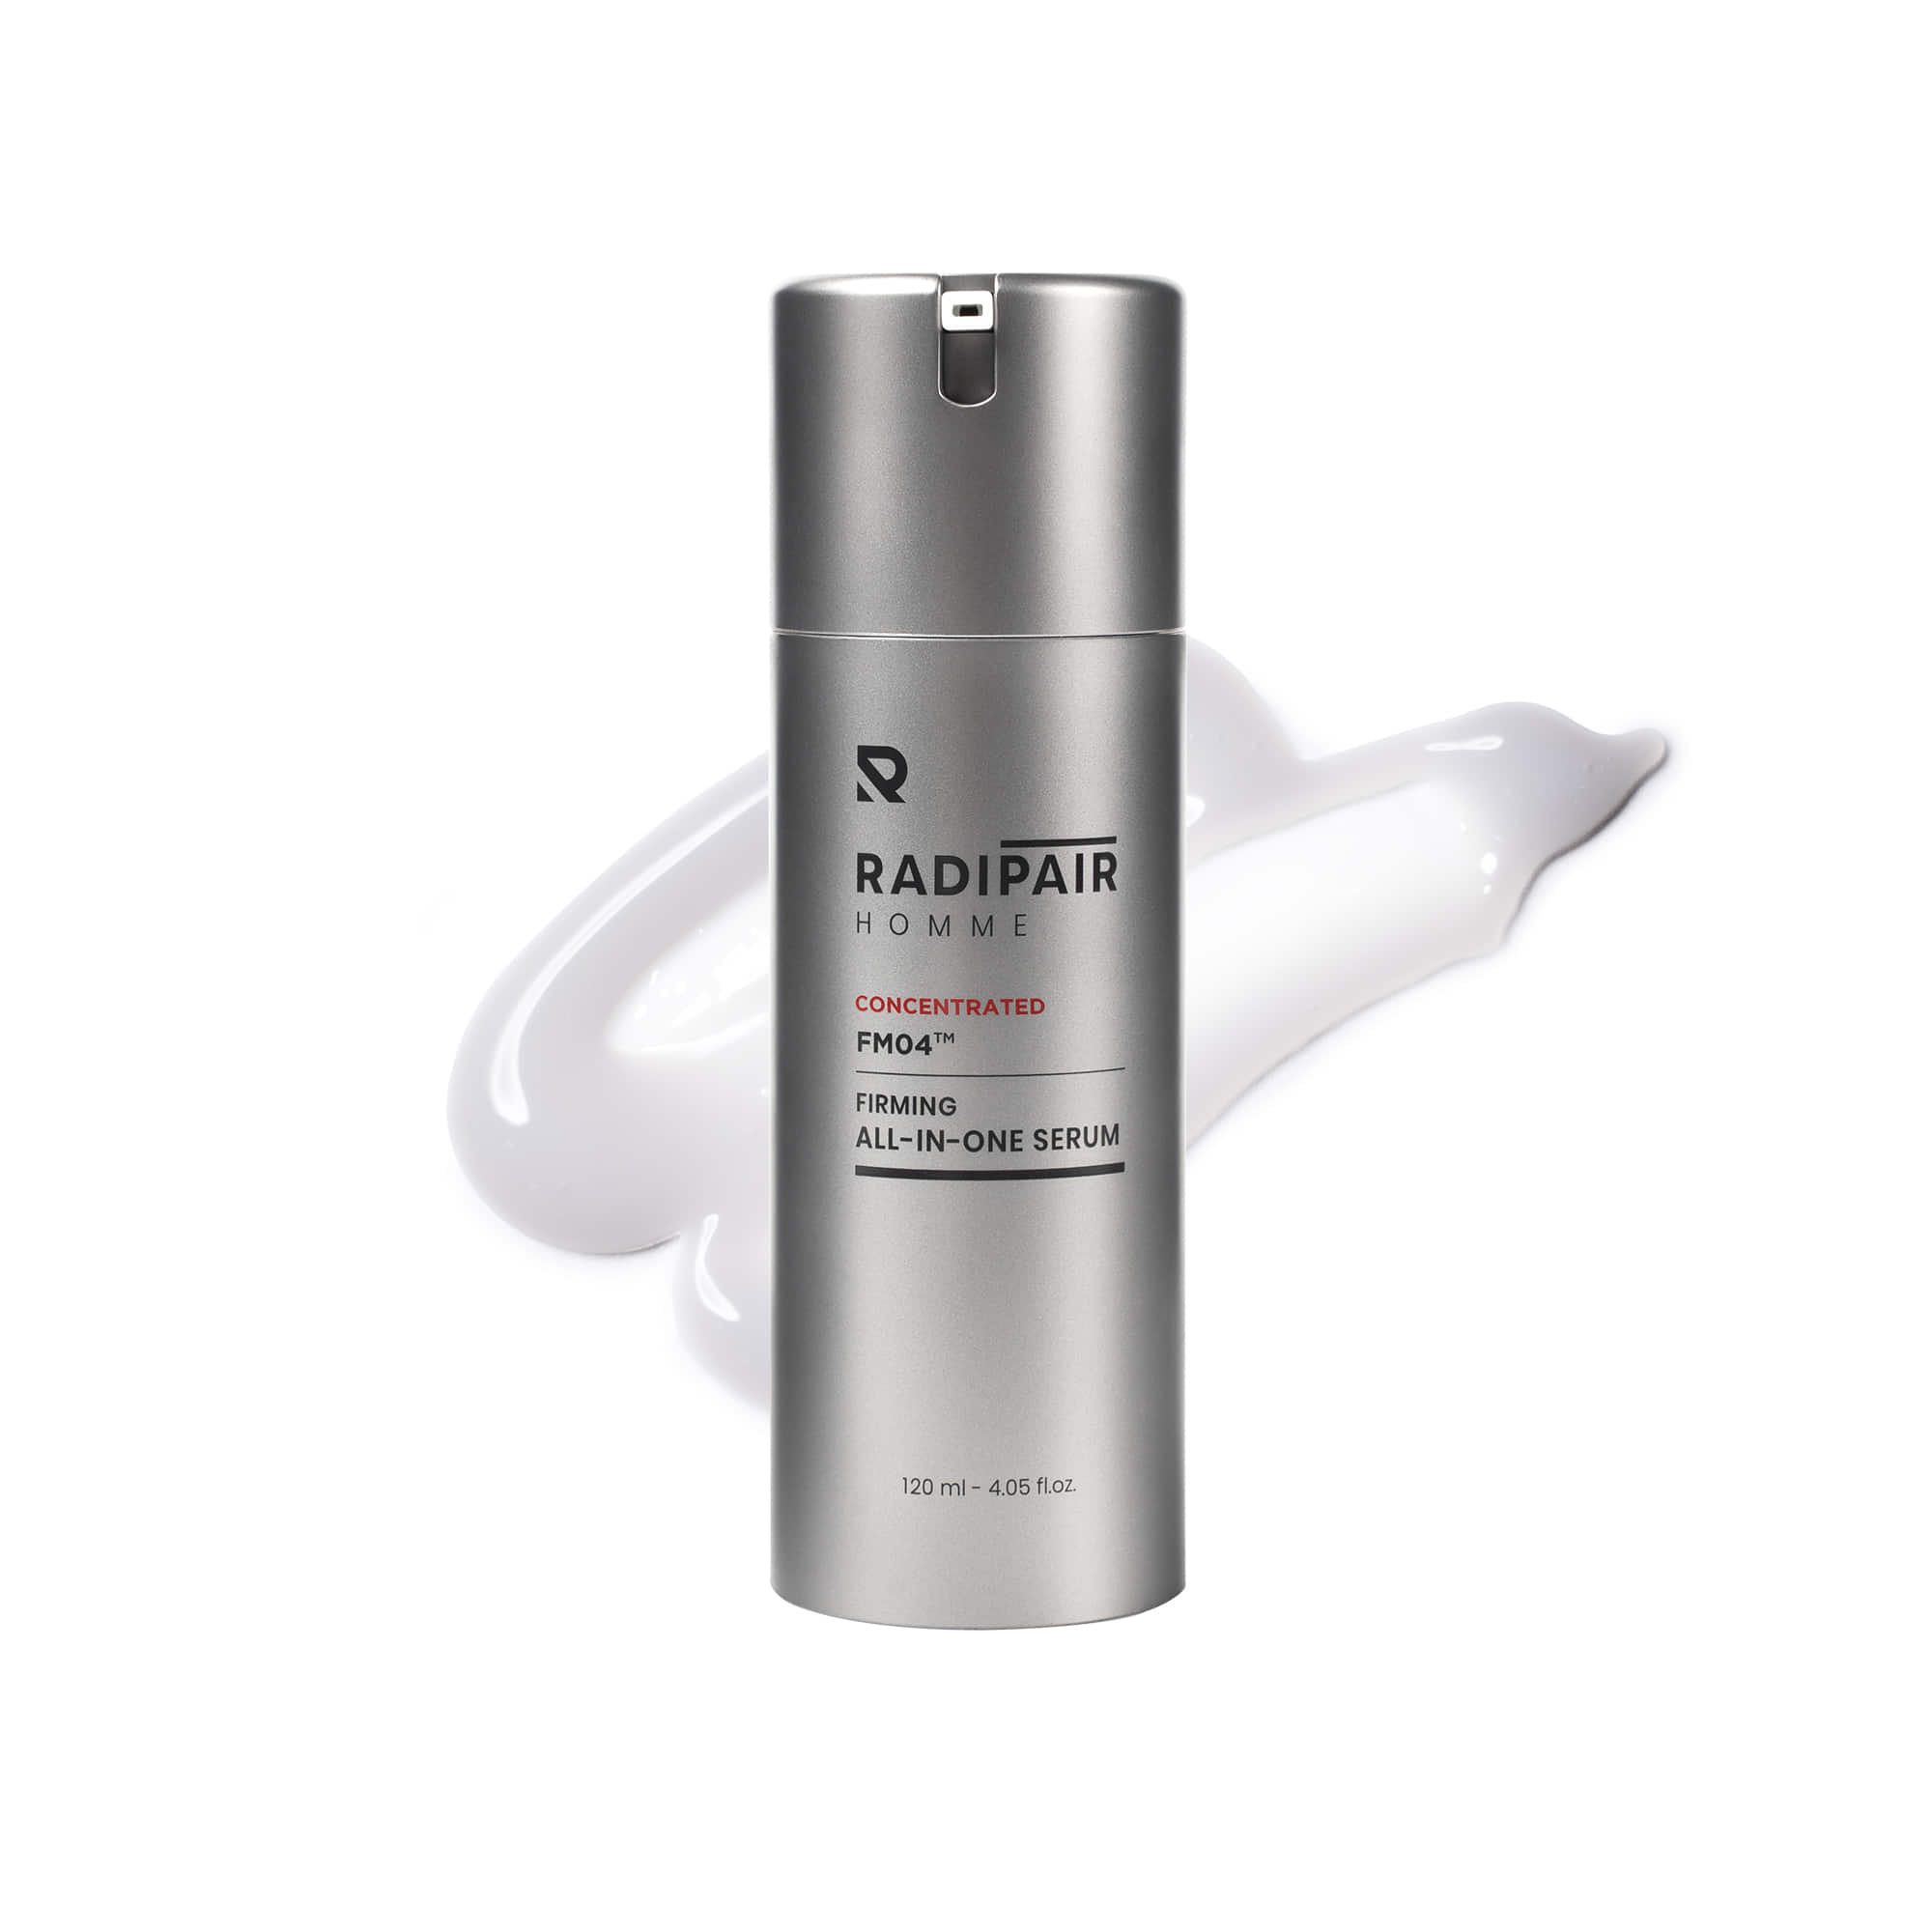 CONCENTRATED FM04 Firming All-in-one Serum